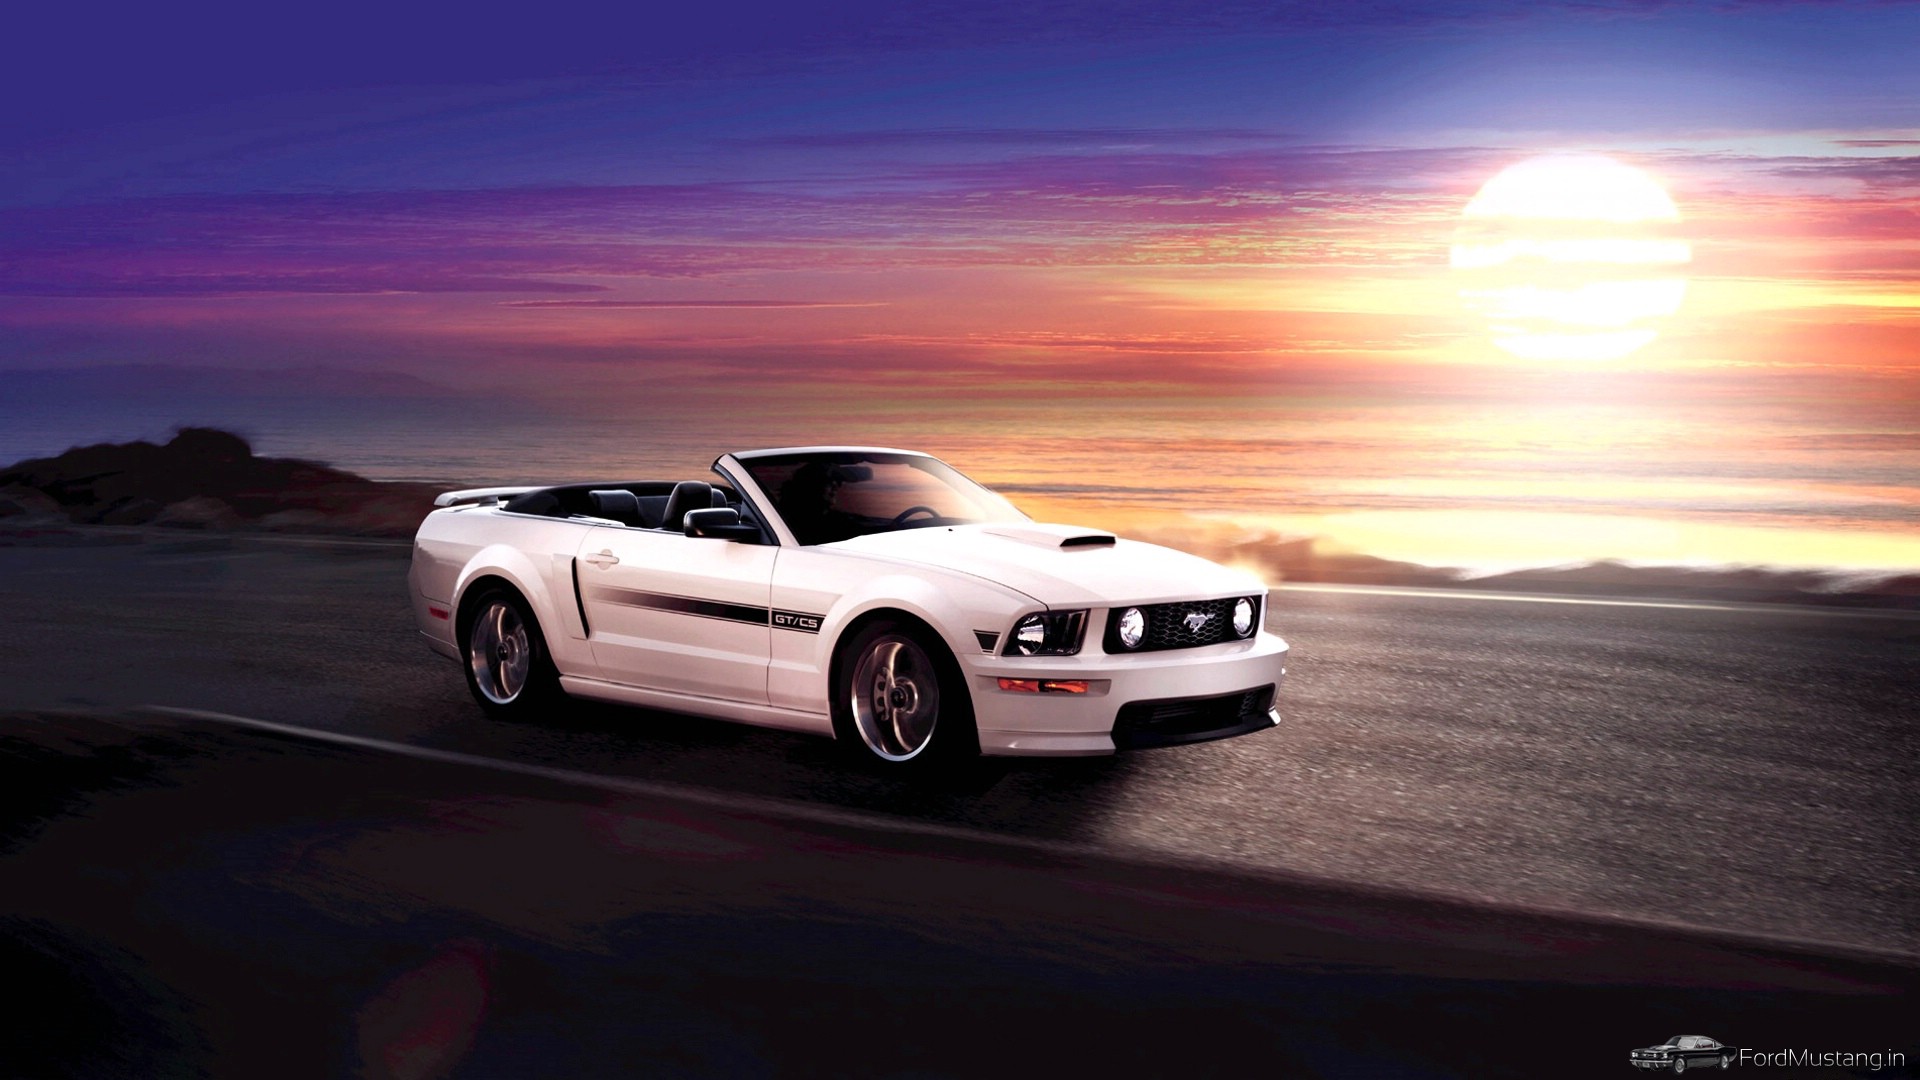 Ford Mustang HD Wallpaper Pack